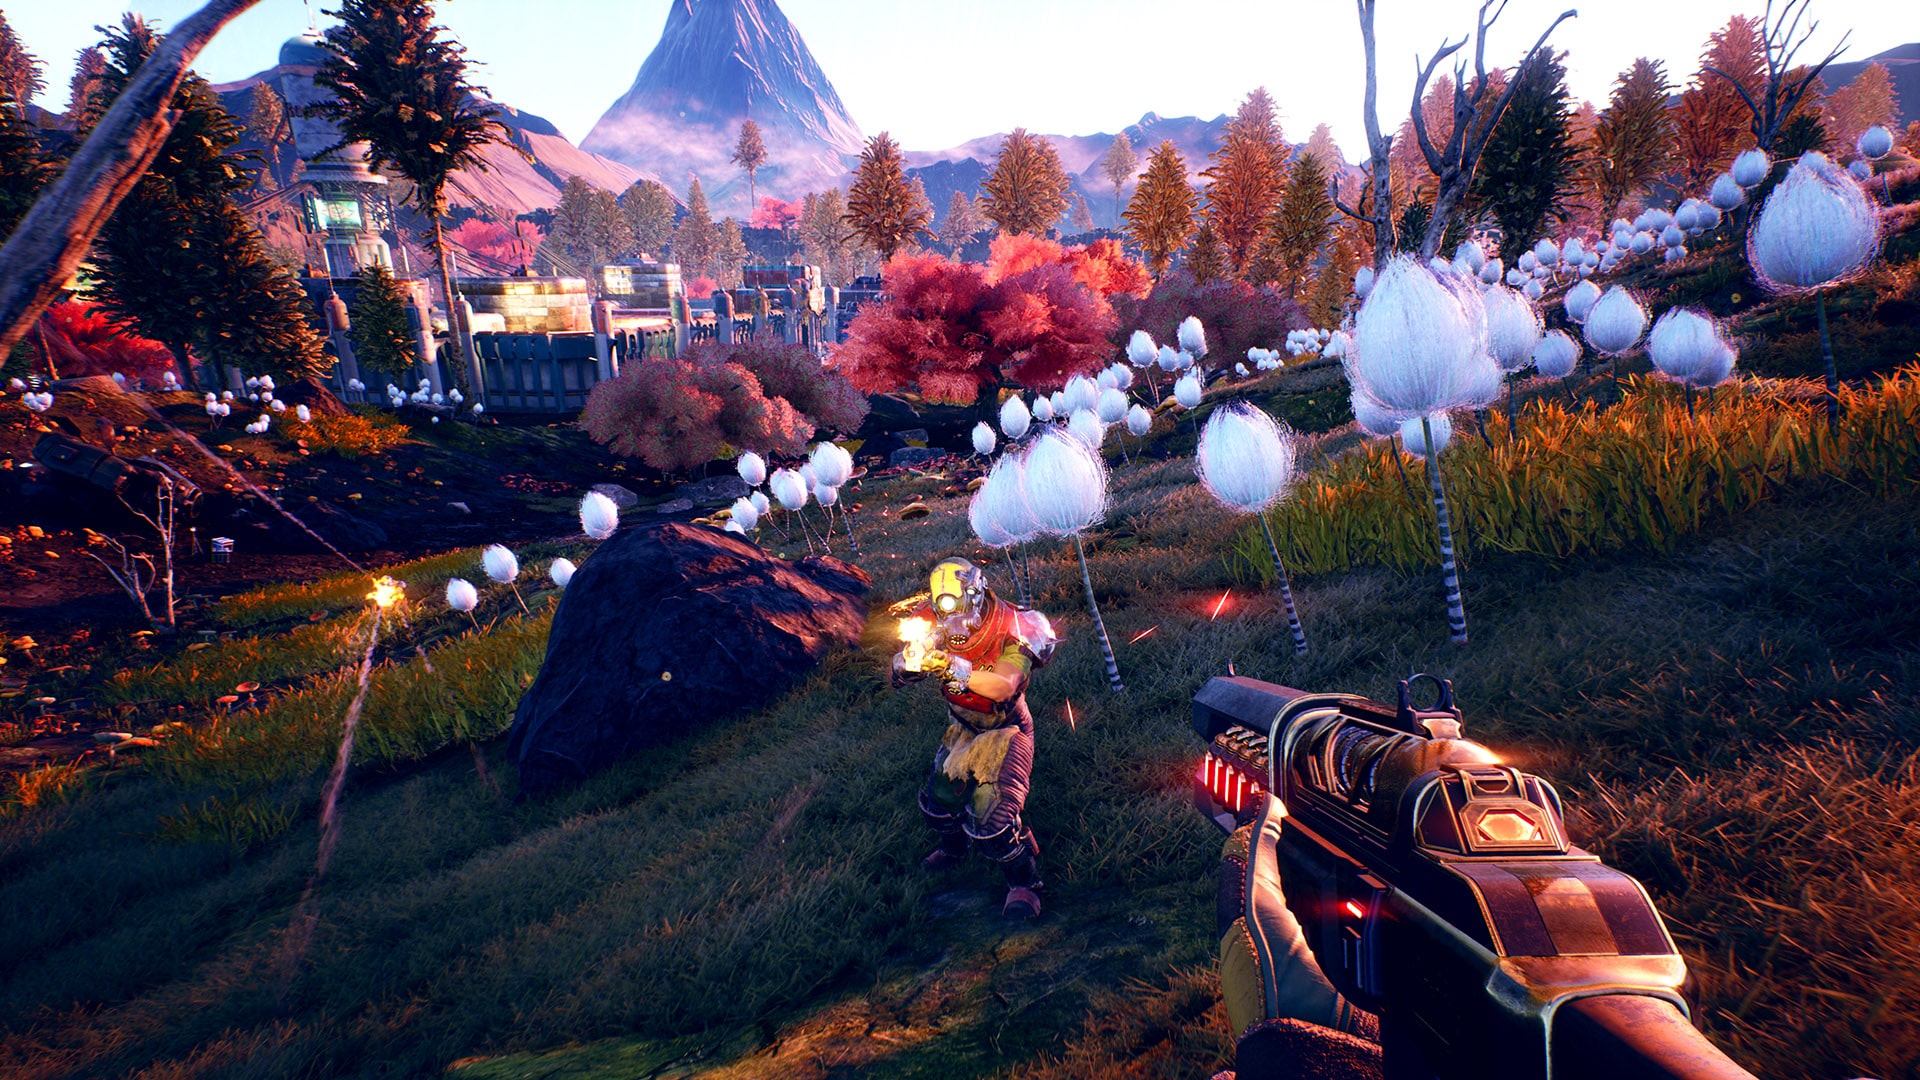  The Outer Worlds Playstation 4 : Take 2 Interactive: Everything  Else